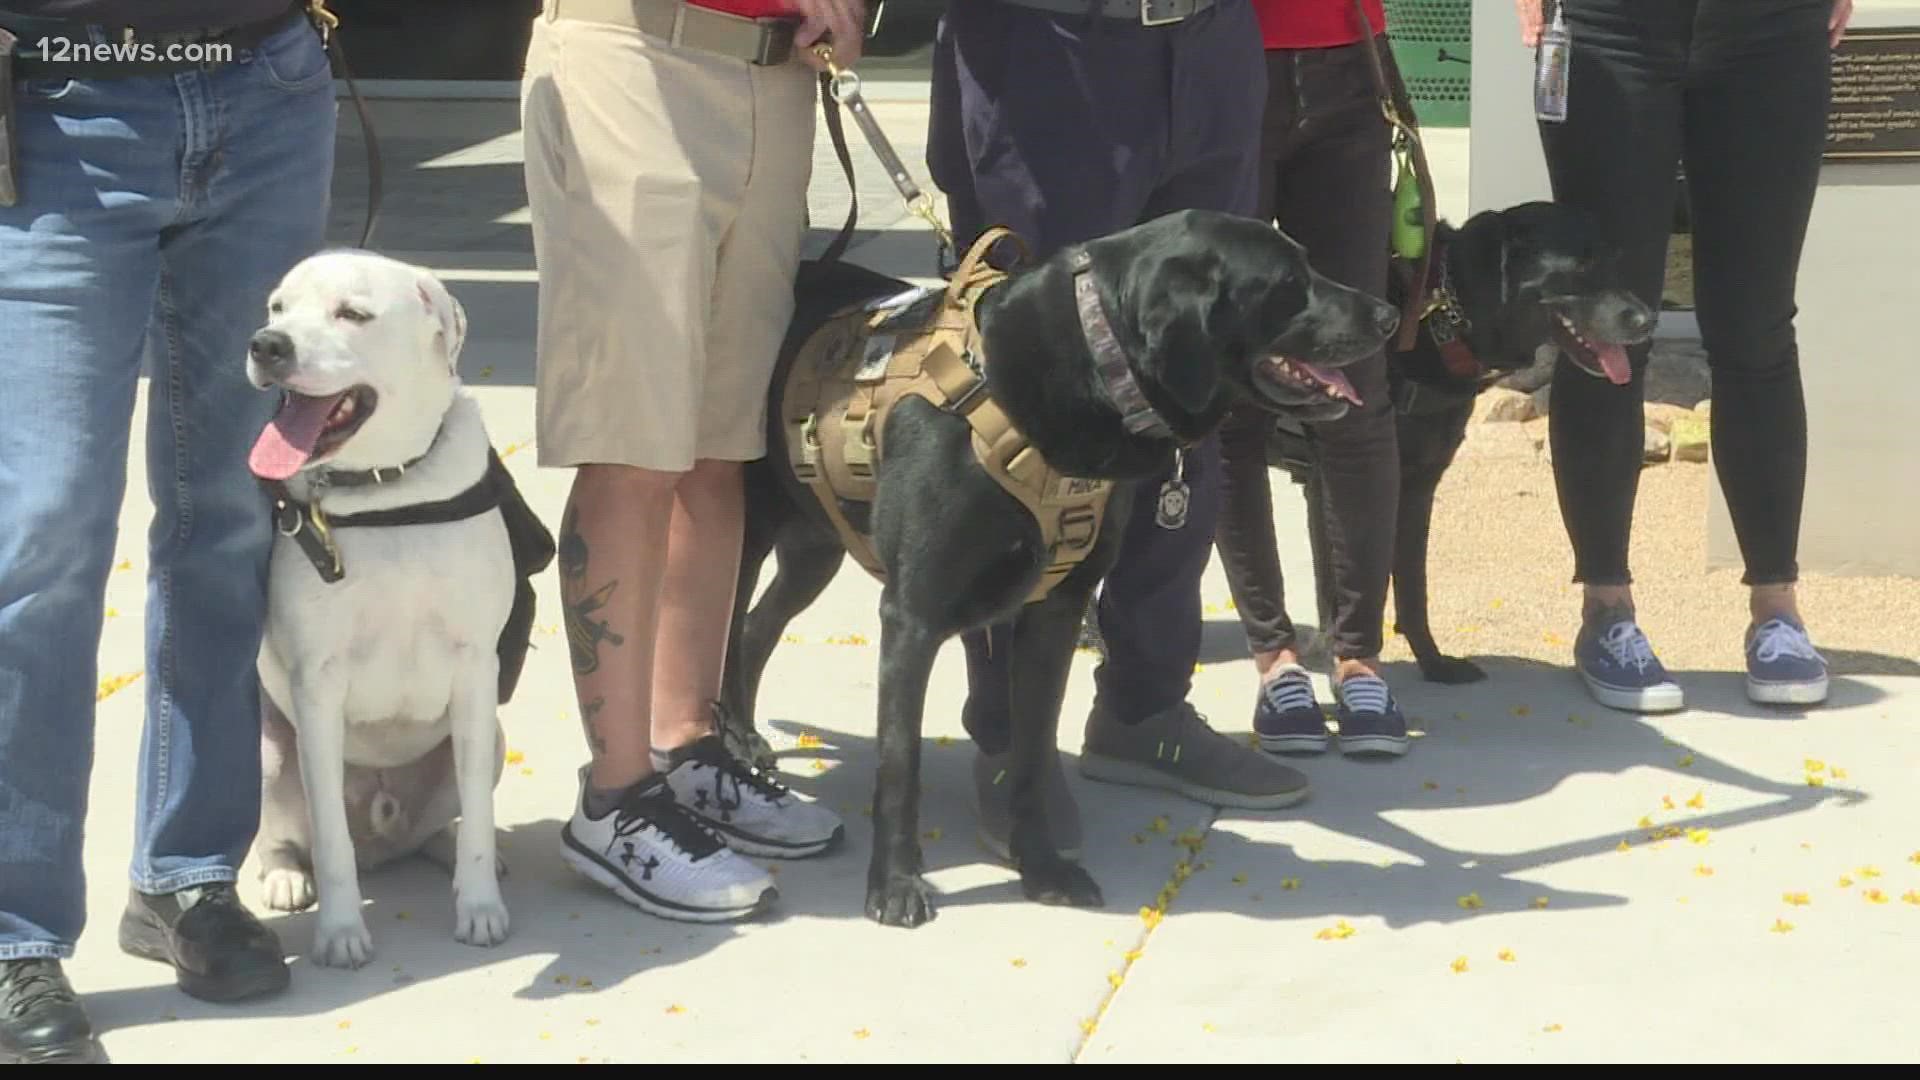 K-9s For Warriors is expanding into Tempe to help Arizona veterans. The organization helps veterans while saving dogs from being euthanized.